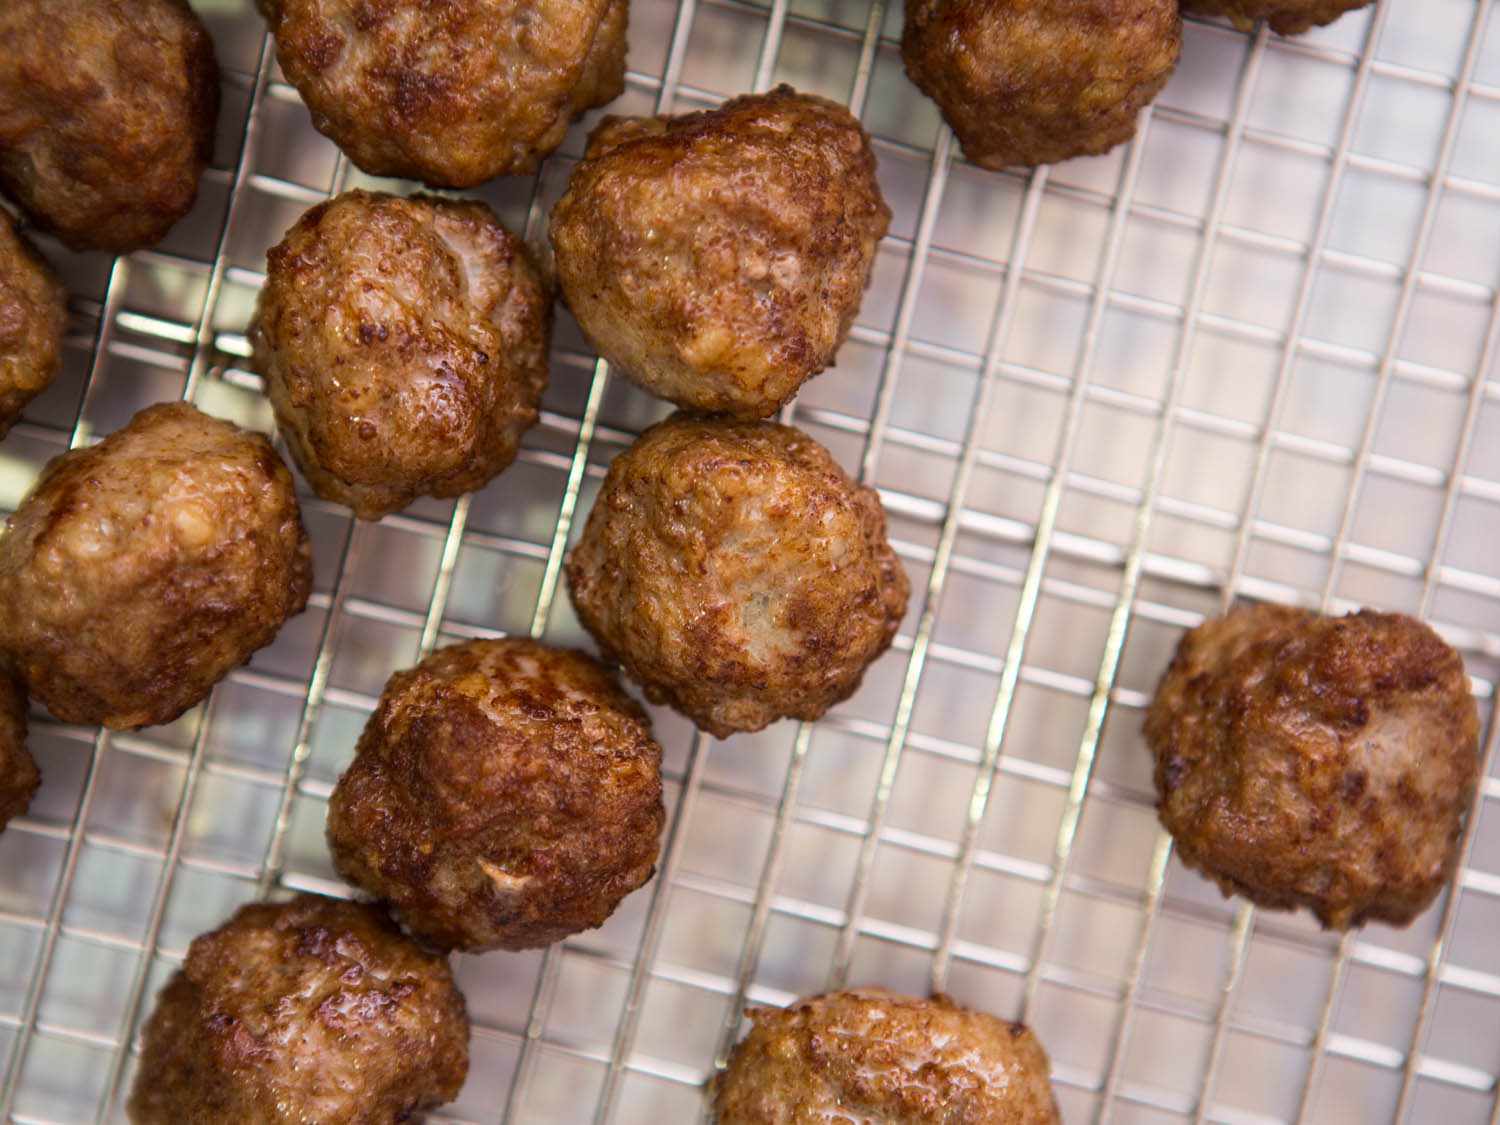 Top down view of a golden brown Swedish meatballs on a cooling rack.